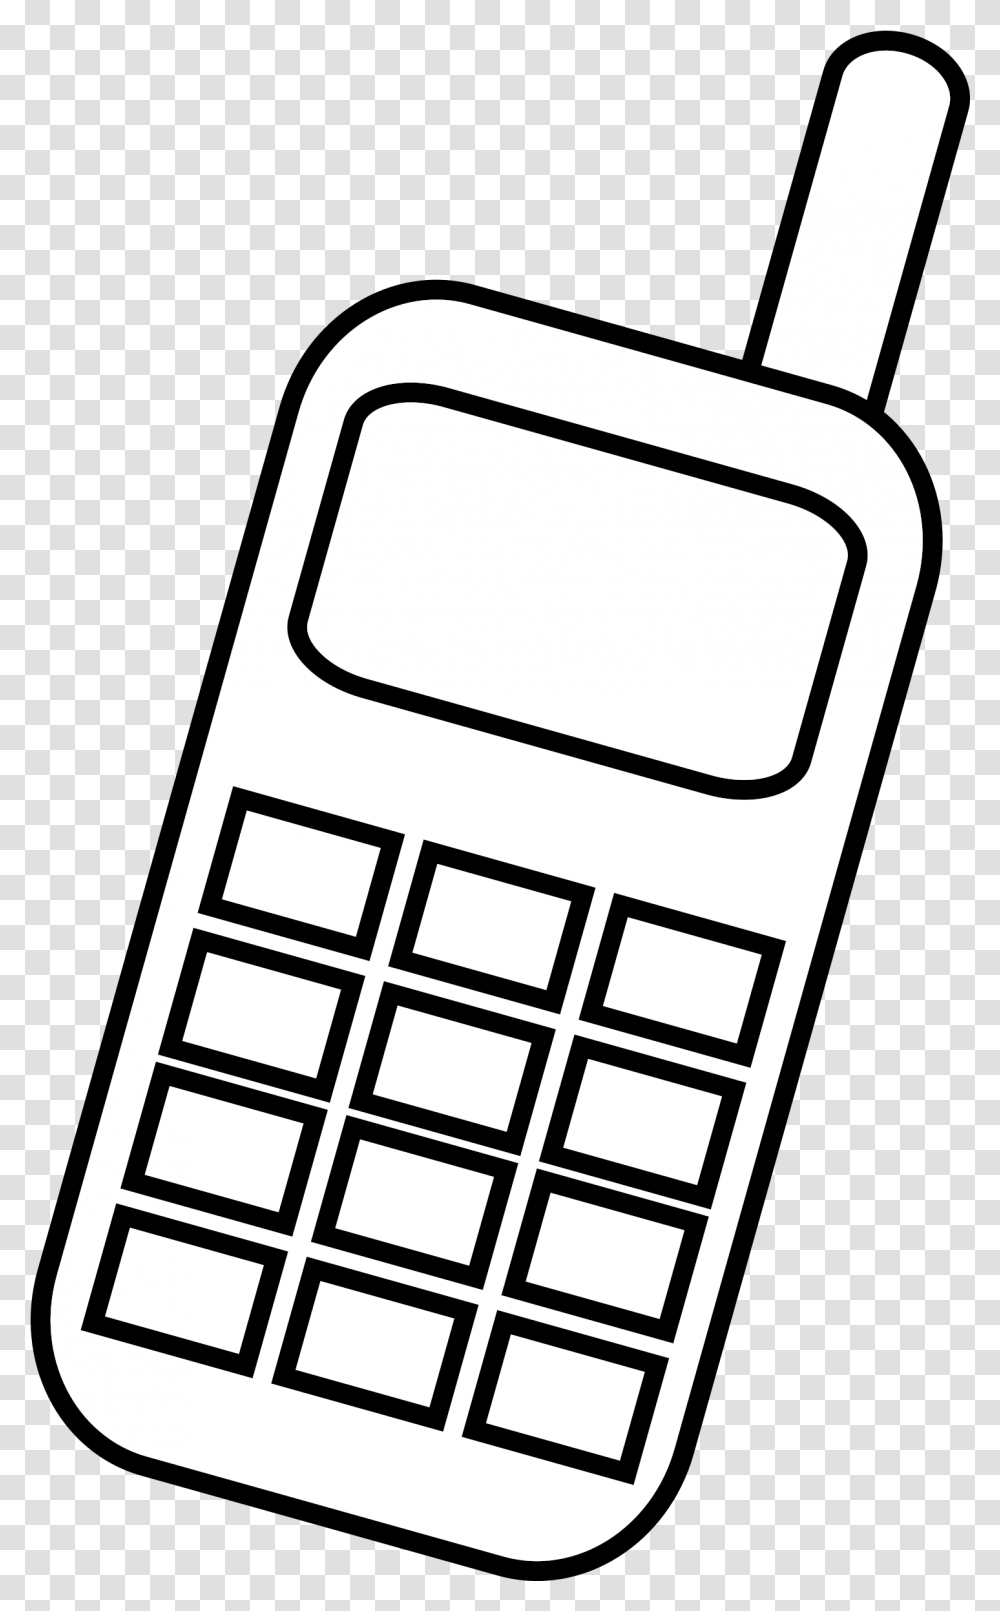 Phone Clipart Icon Cellphone Clip Art Black And White, Electronics, Calculator, Grenade, Bomb Transparent Png